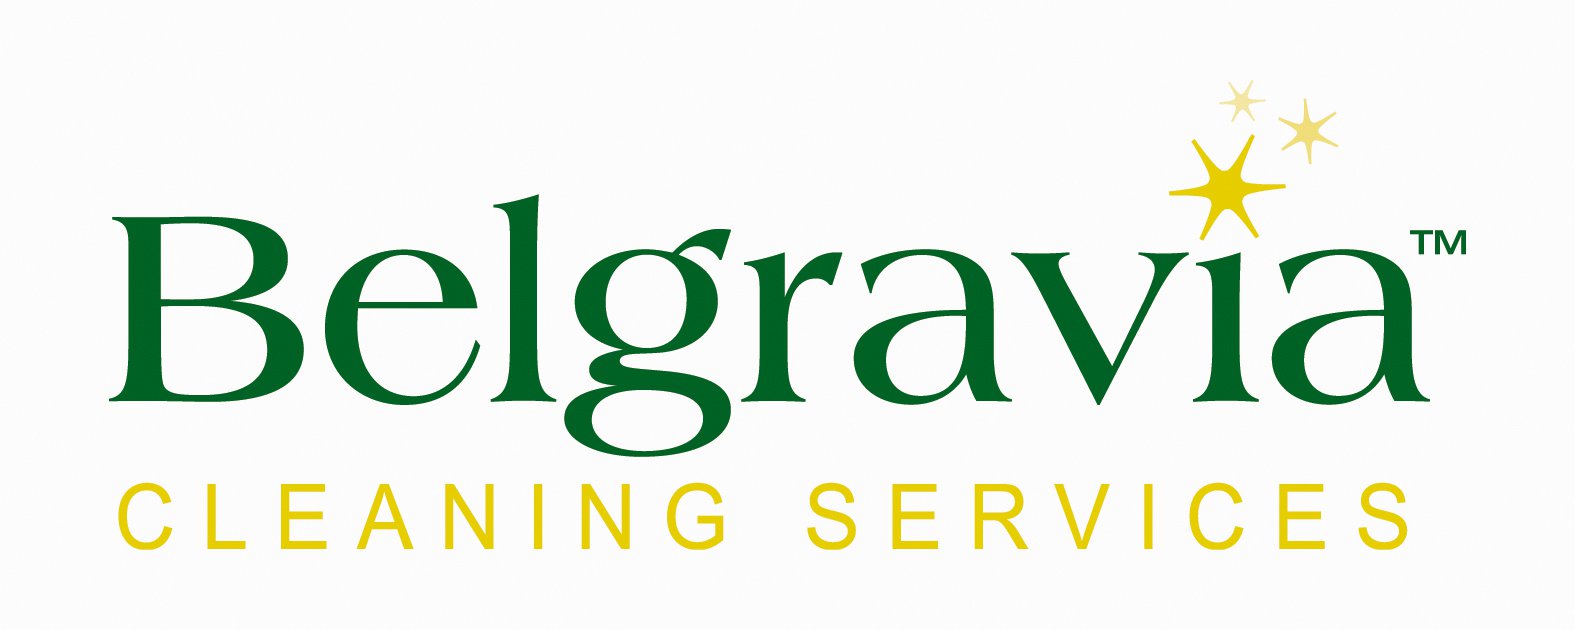 Belgravia Cleaning Services